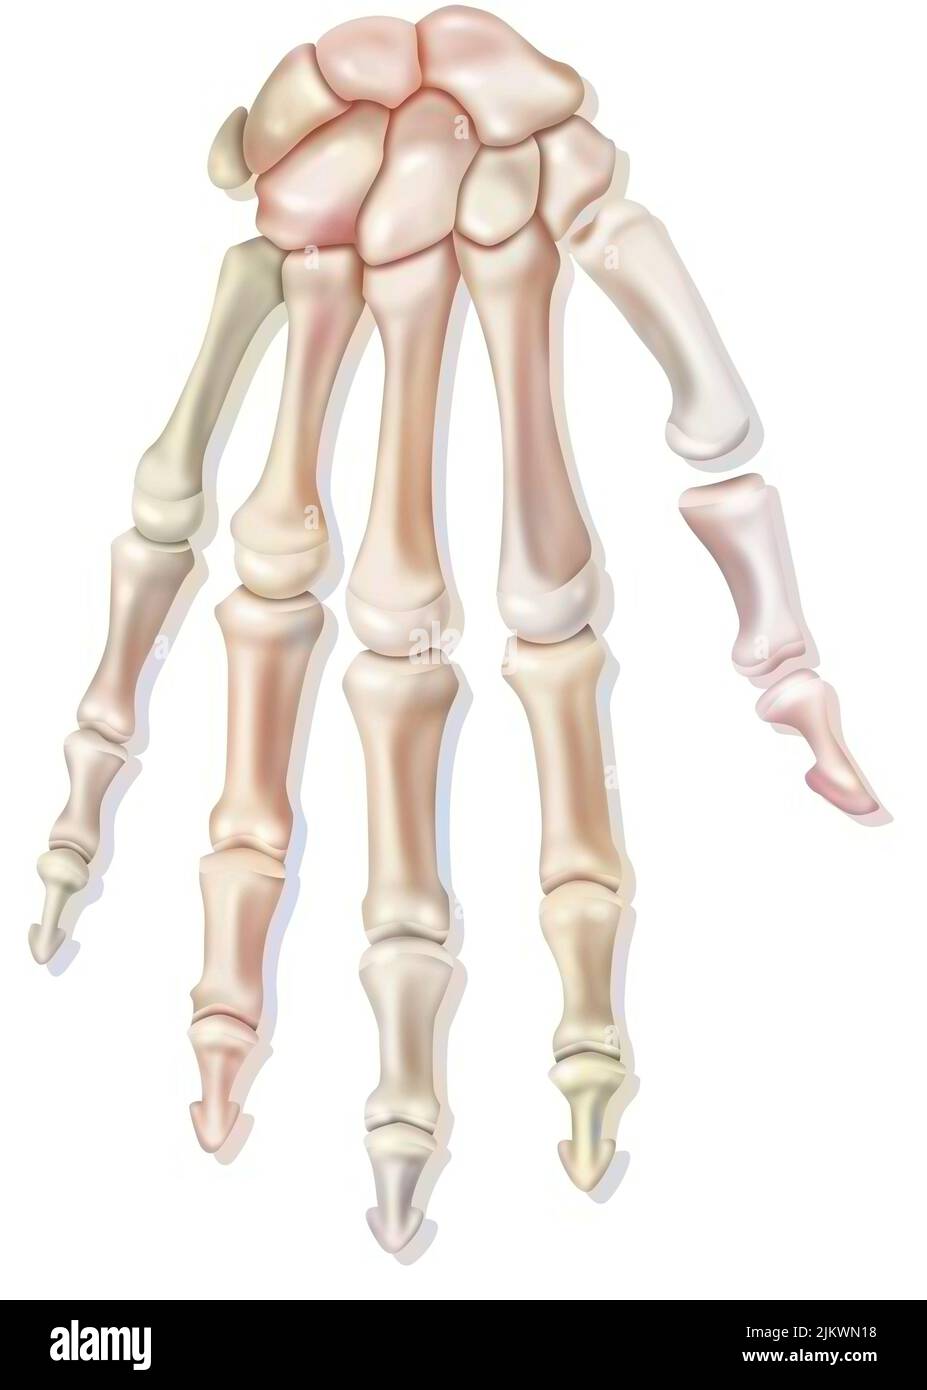 Bones of the right hand in dorsal view. Stock Photo